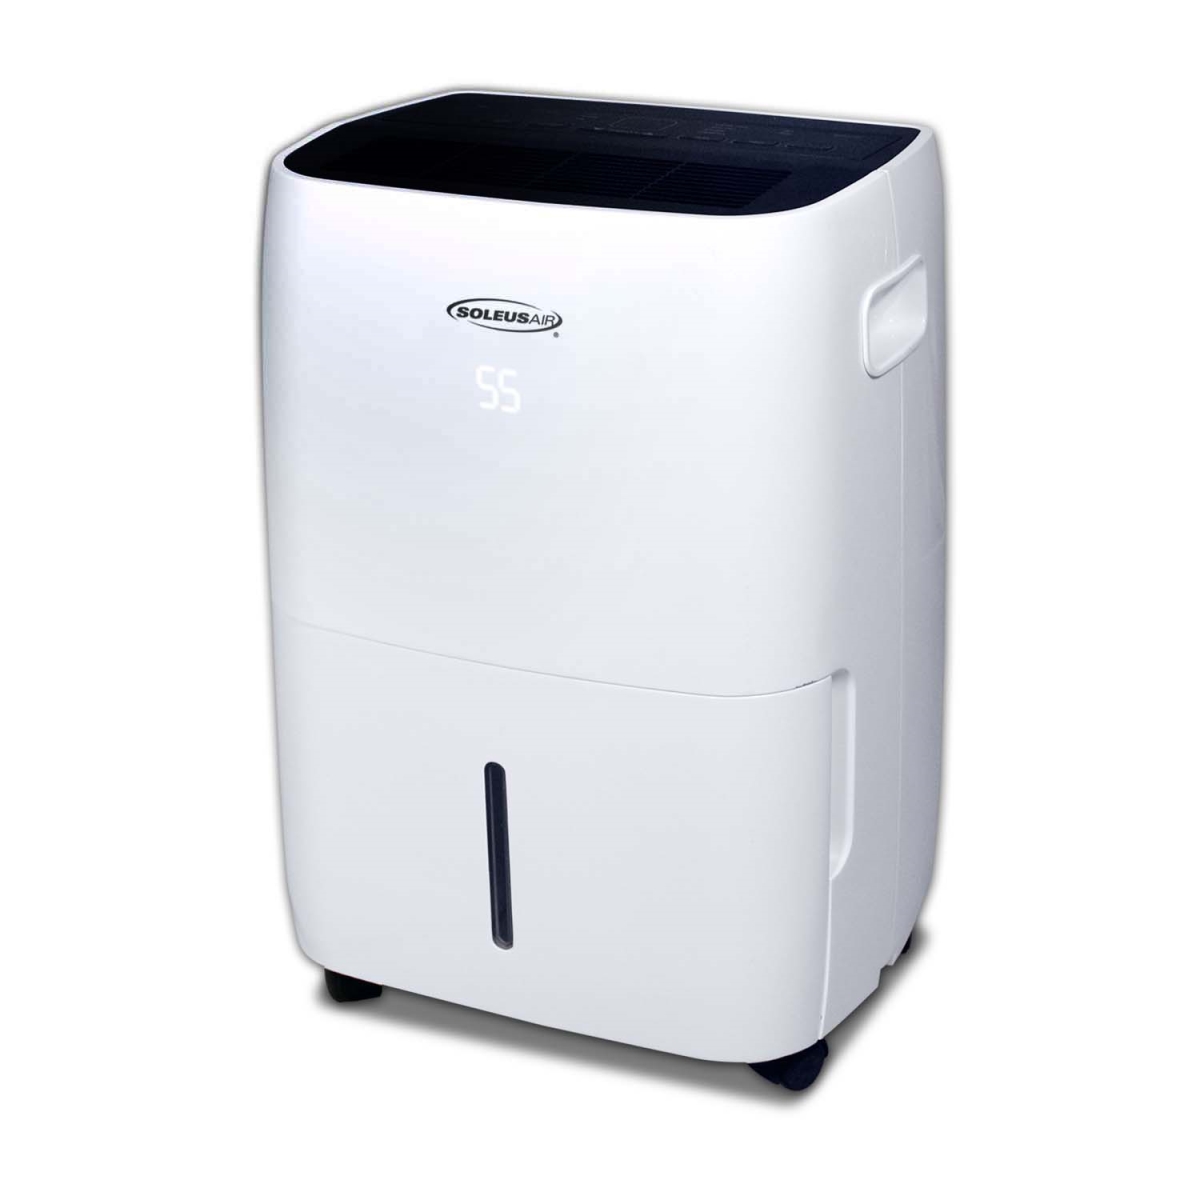 Medis One 30 Pint Dehumidifier with Mirage Display